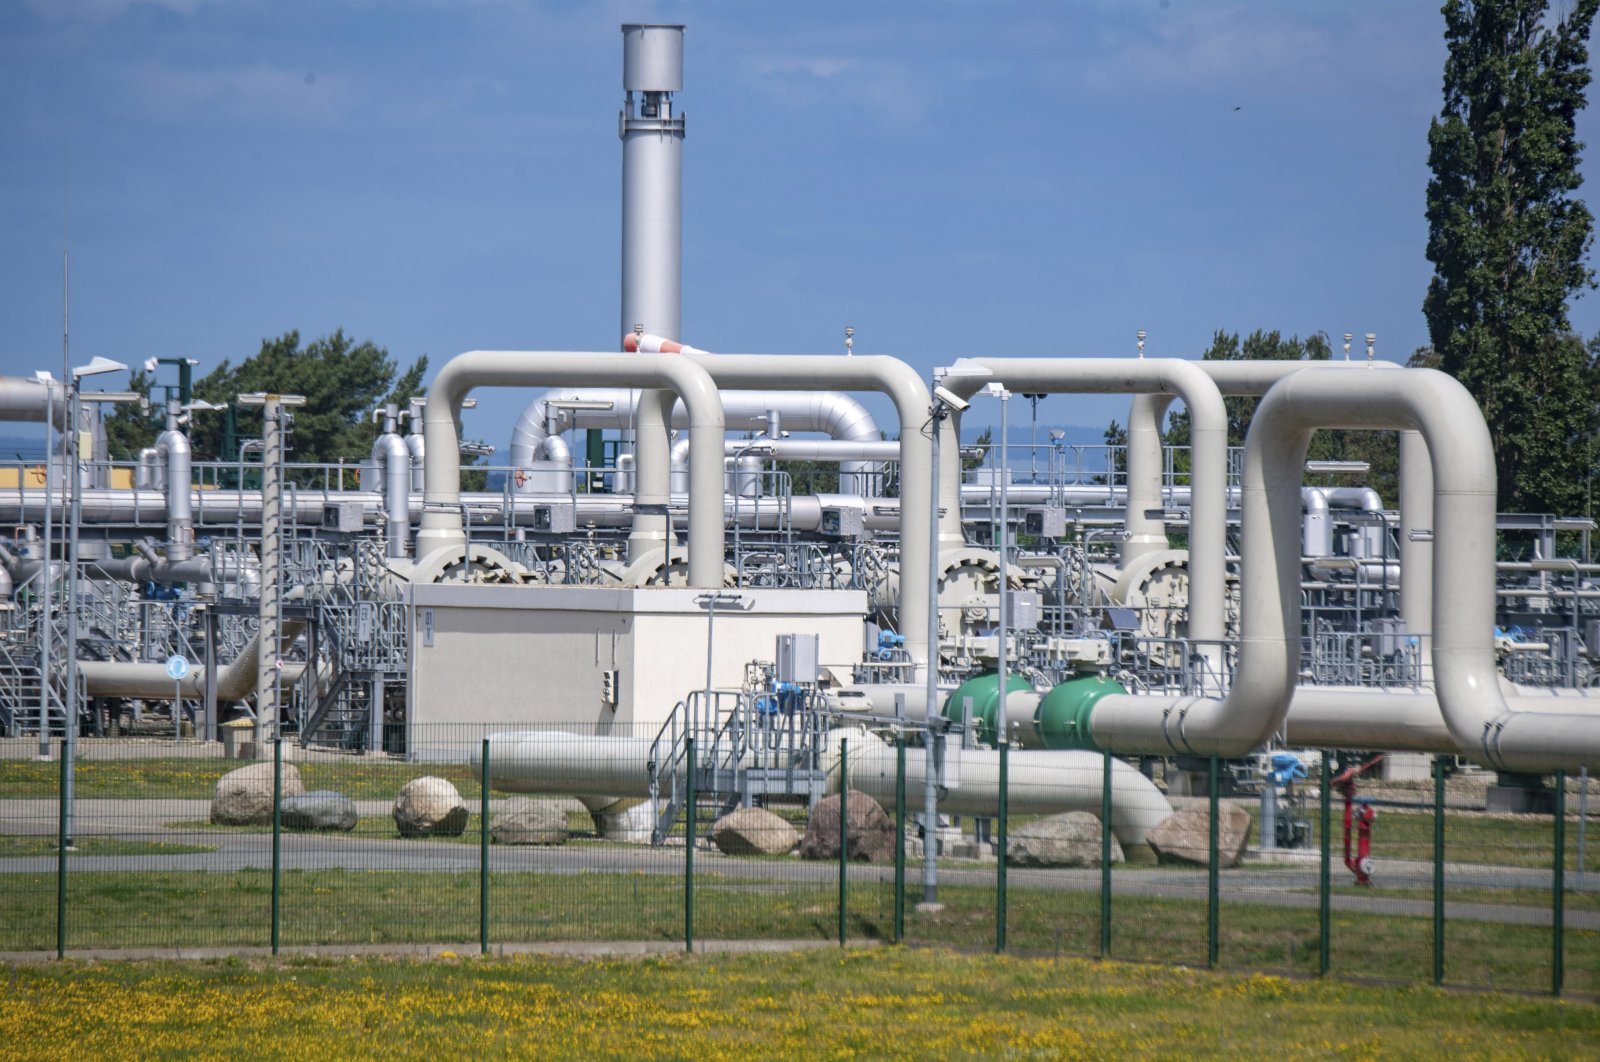 Pipe systems and shut-off devices at the gas receiving station of the Nord Stream 1 Baltic Sea pipeline and the transfer station of the OPAL long-distance gas pipeline in Lubmin, Germany, June 21, 2022. (AP Photo)